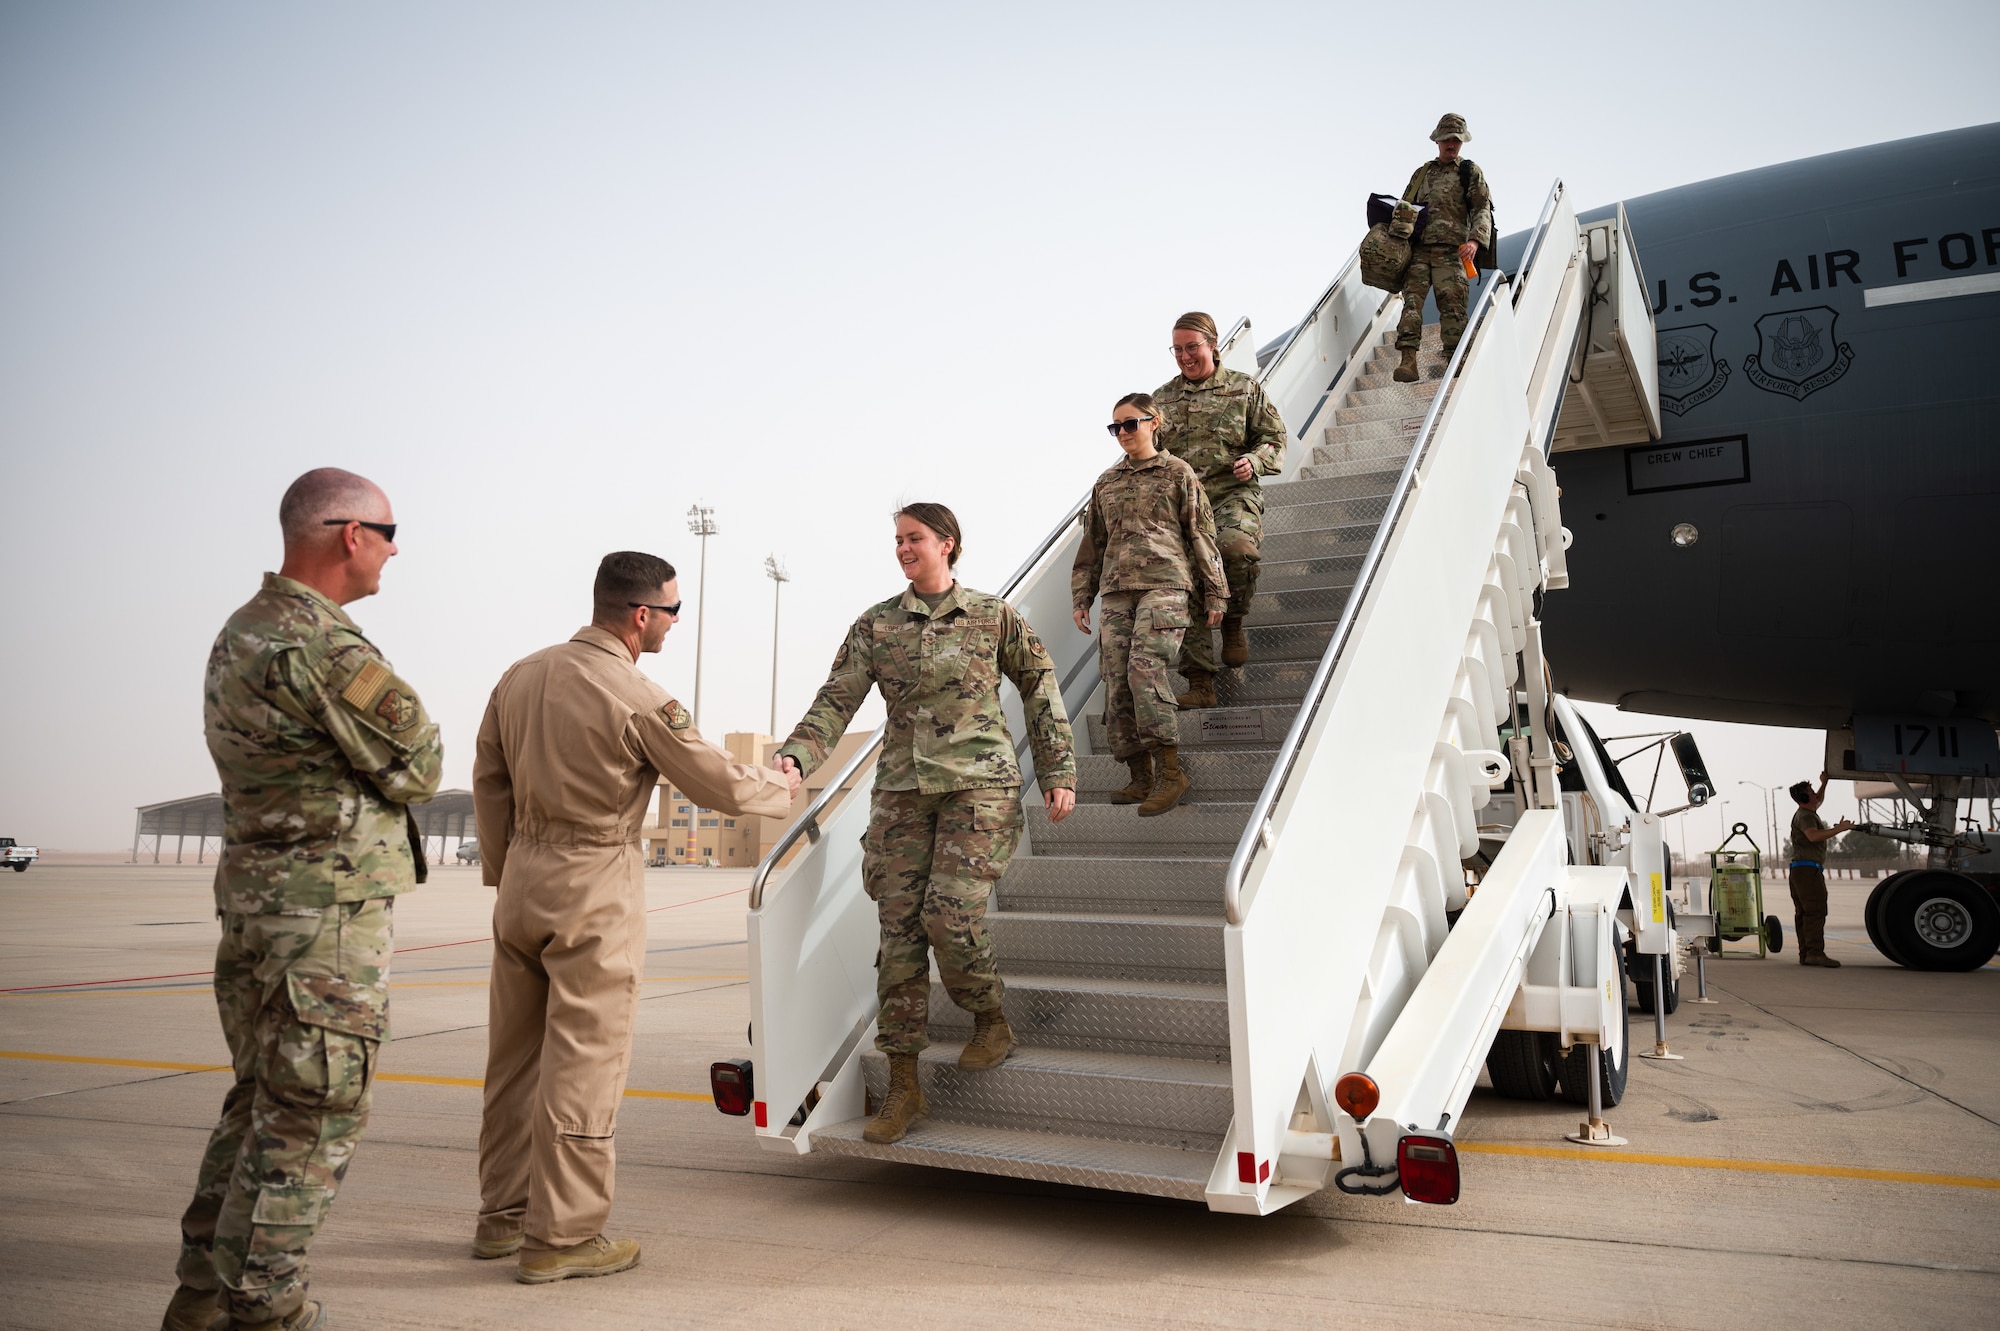 U.S. Air Force Brig. Gen. Robert Davis, 378th Air Expeditionary Wing commander, greets Airmen from the 908th Expeditionary Air Refueling Squadron at Prince Sultan Air Base, Kingdom of Saudi Arabia, March 6, 2022. Previously operating out of Al Dhafra Air Base, United Arab Emirates, the 908th EARS relocated to PSAB. (U.S. Air Force photo by Senior Airman Jacob B. Wrightsman)